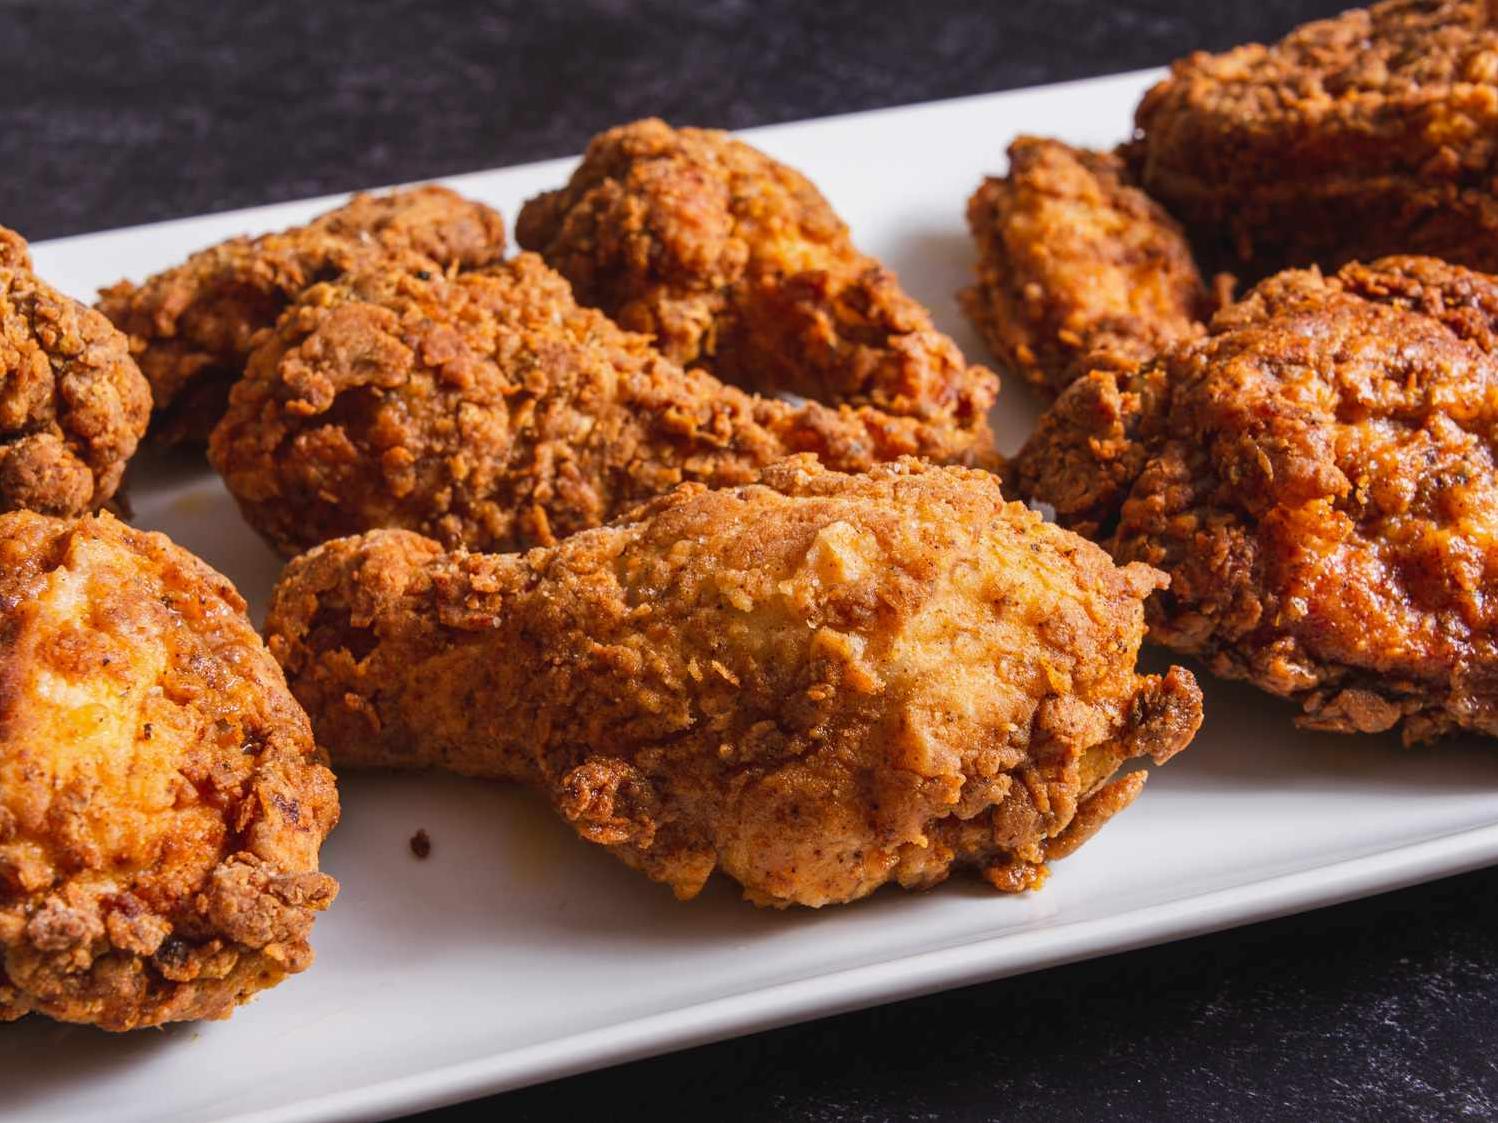  Golden and crispy chicken, full of southern flavor!